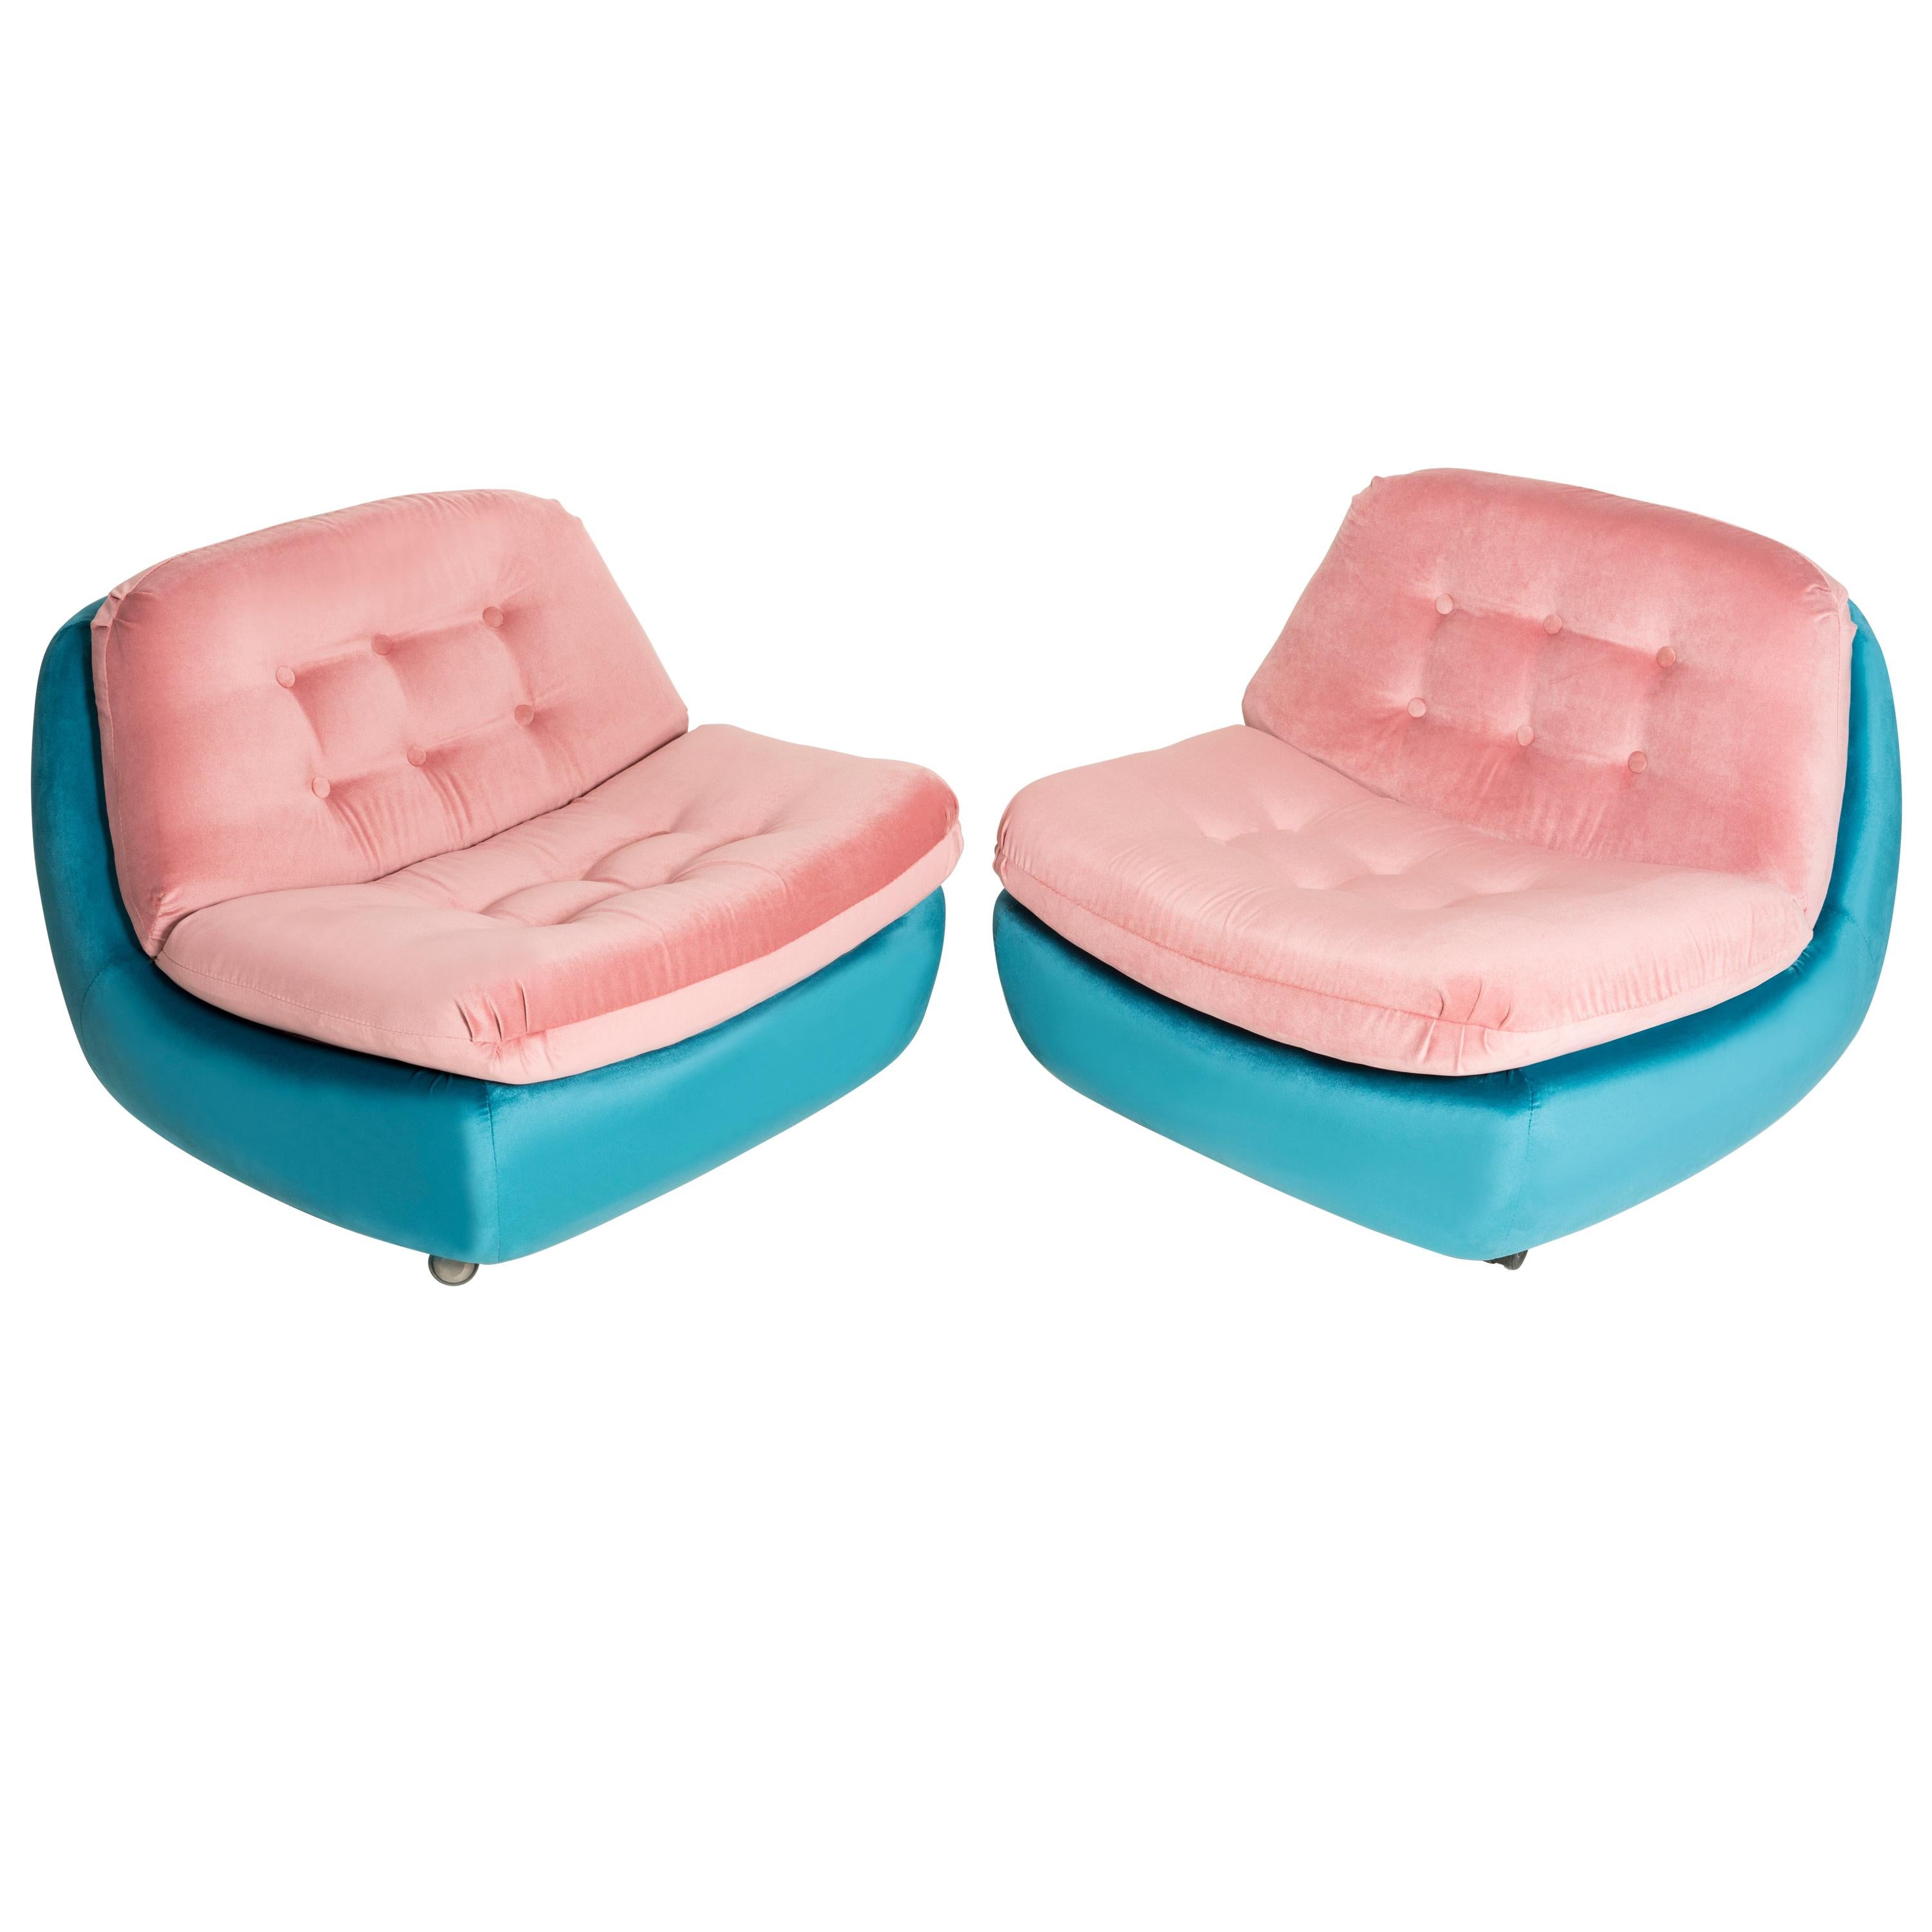 Set of Two 20th Century Vintage Pink and Blue Atlantis Armchairs, 1960s For Sale